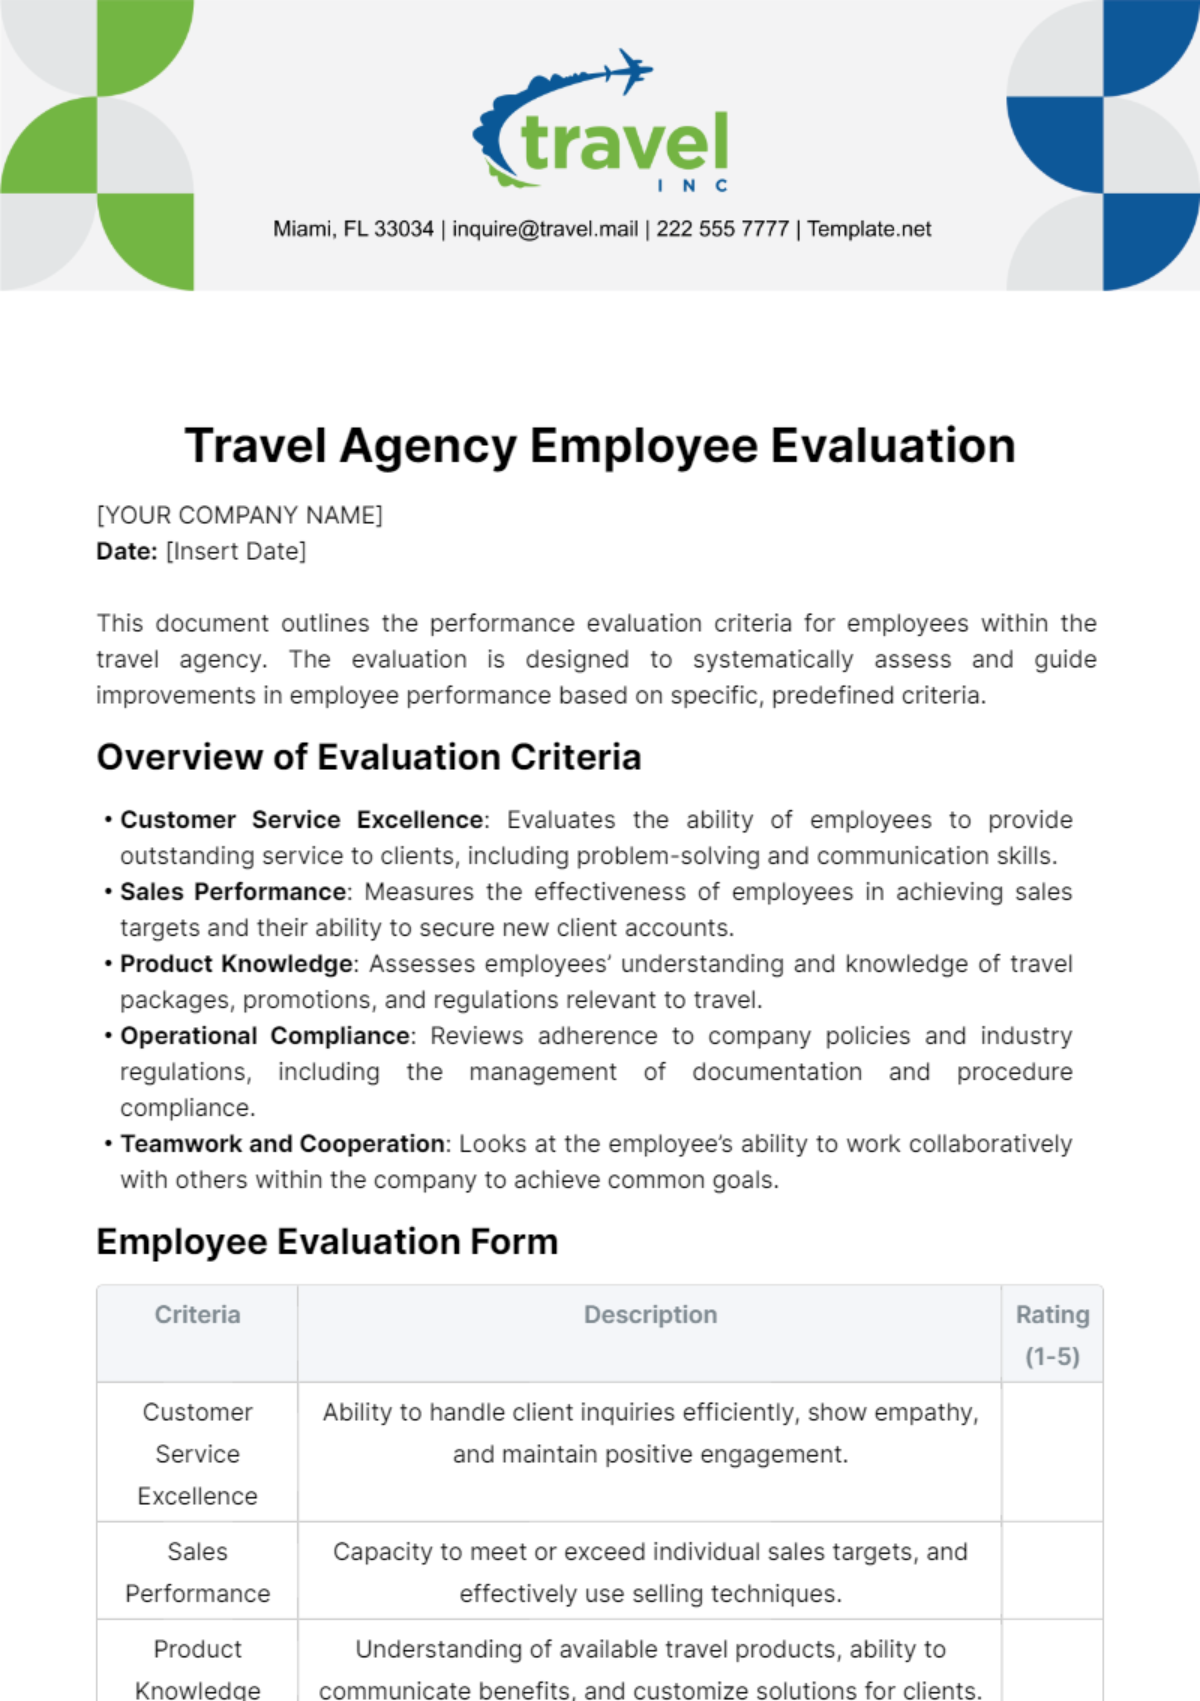 Free Travel Agency Employee Evaluation Template